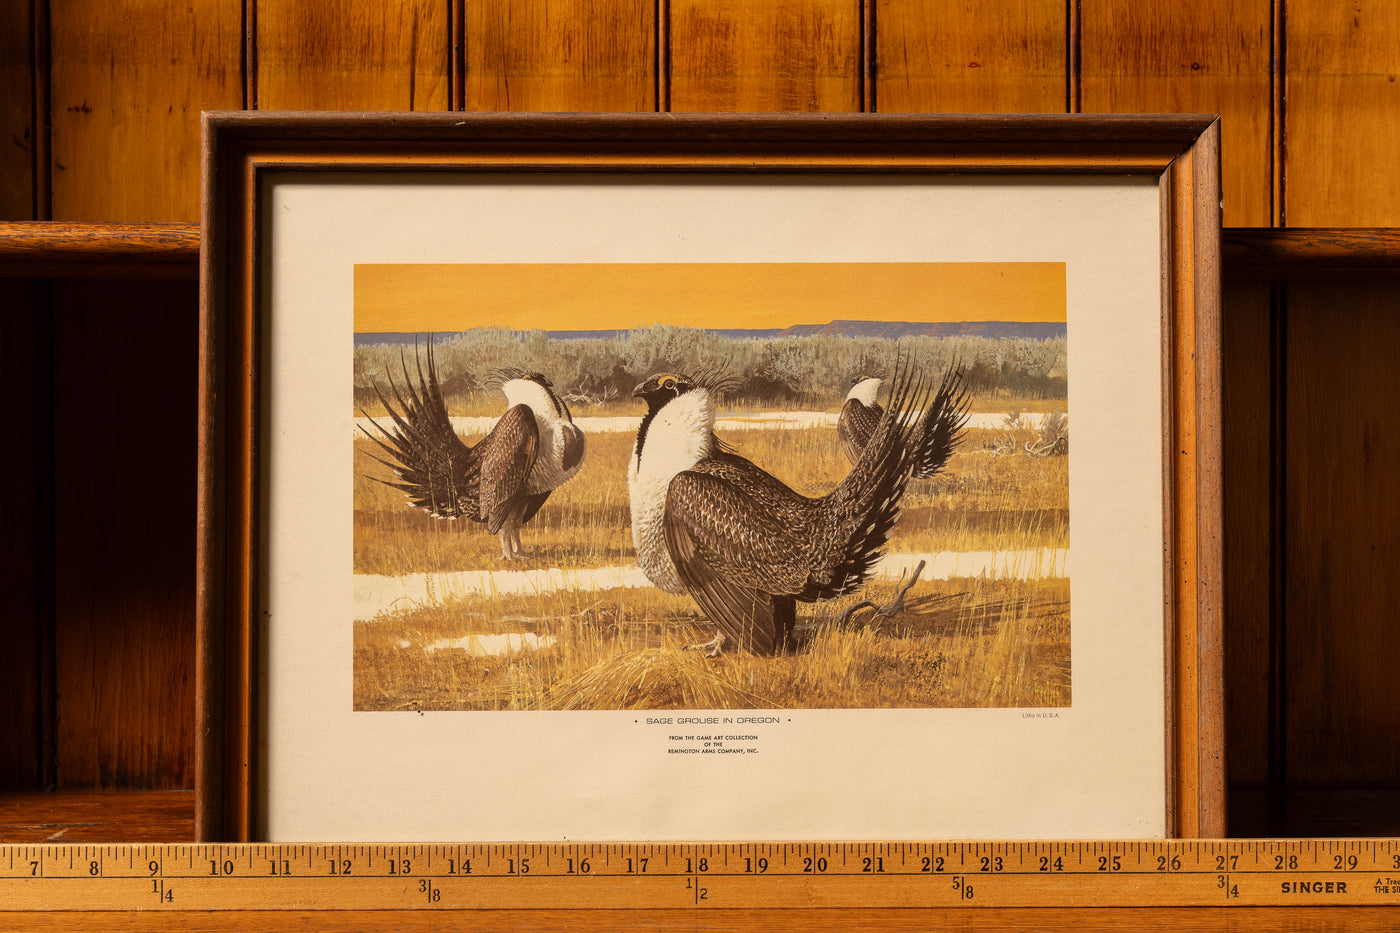 Remington Arms "Sage Grouse in Oregon" Game Art Collection Framed Litho